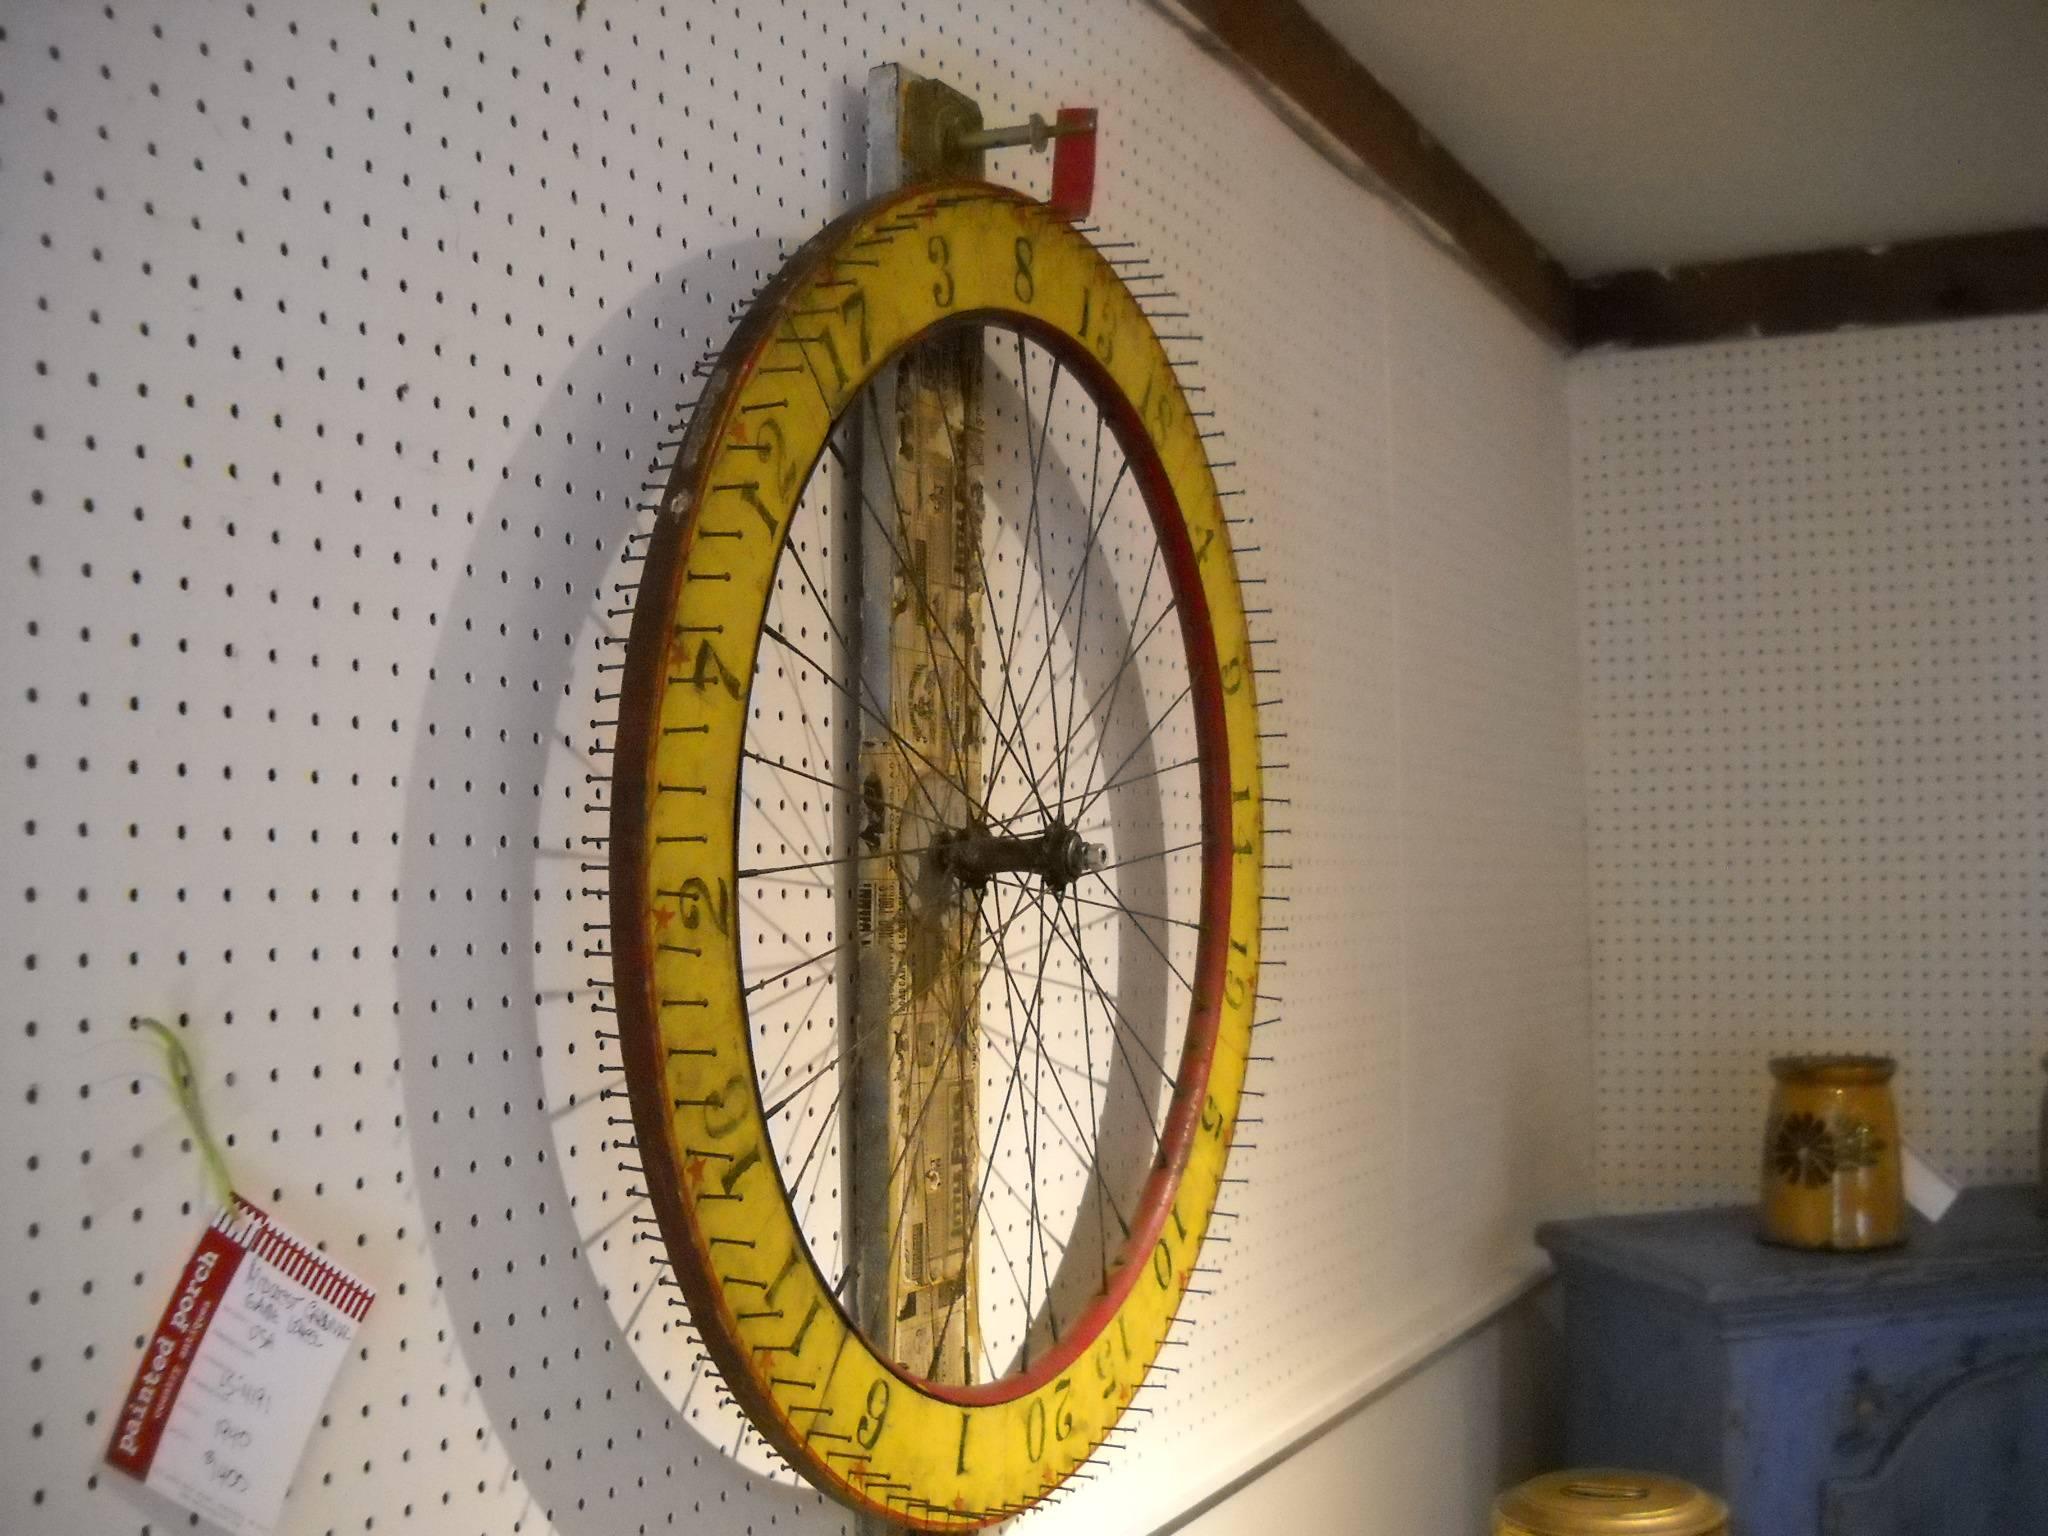 This is one of two Carnival game wheels we found. This one is from the Midwest and made out of a bicycle wheel, complete with a clicker that sounds when you turn the wheel. Wow, what a piece of folk art for your wall!